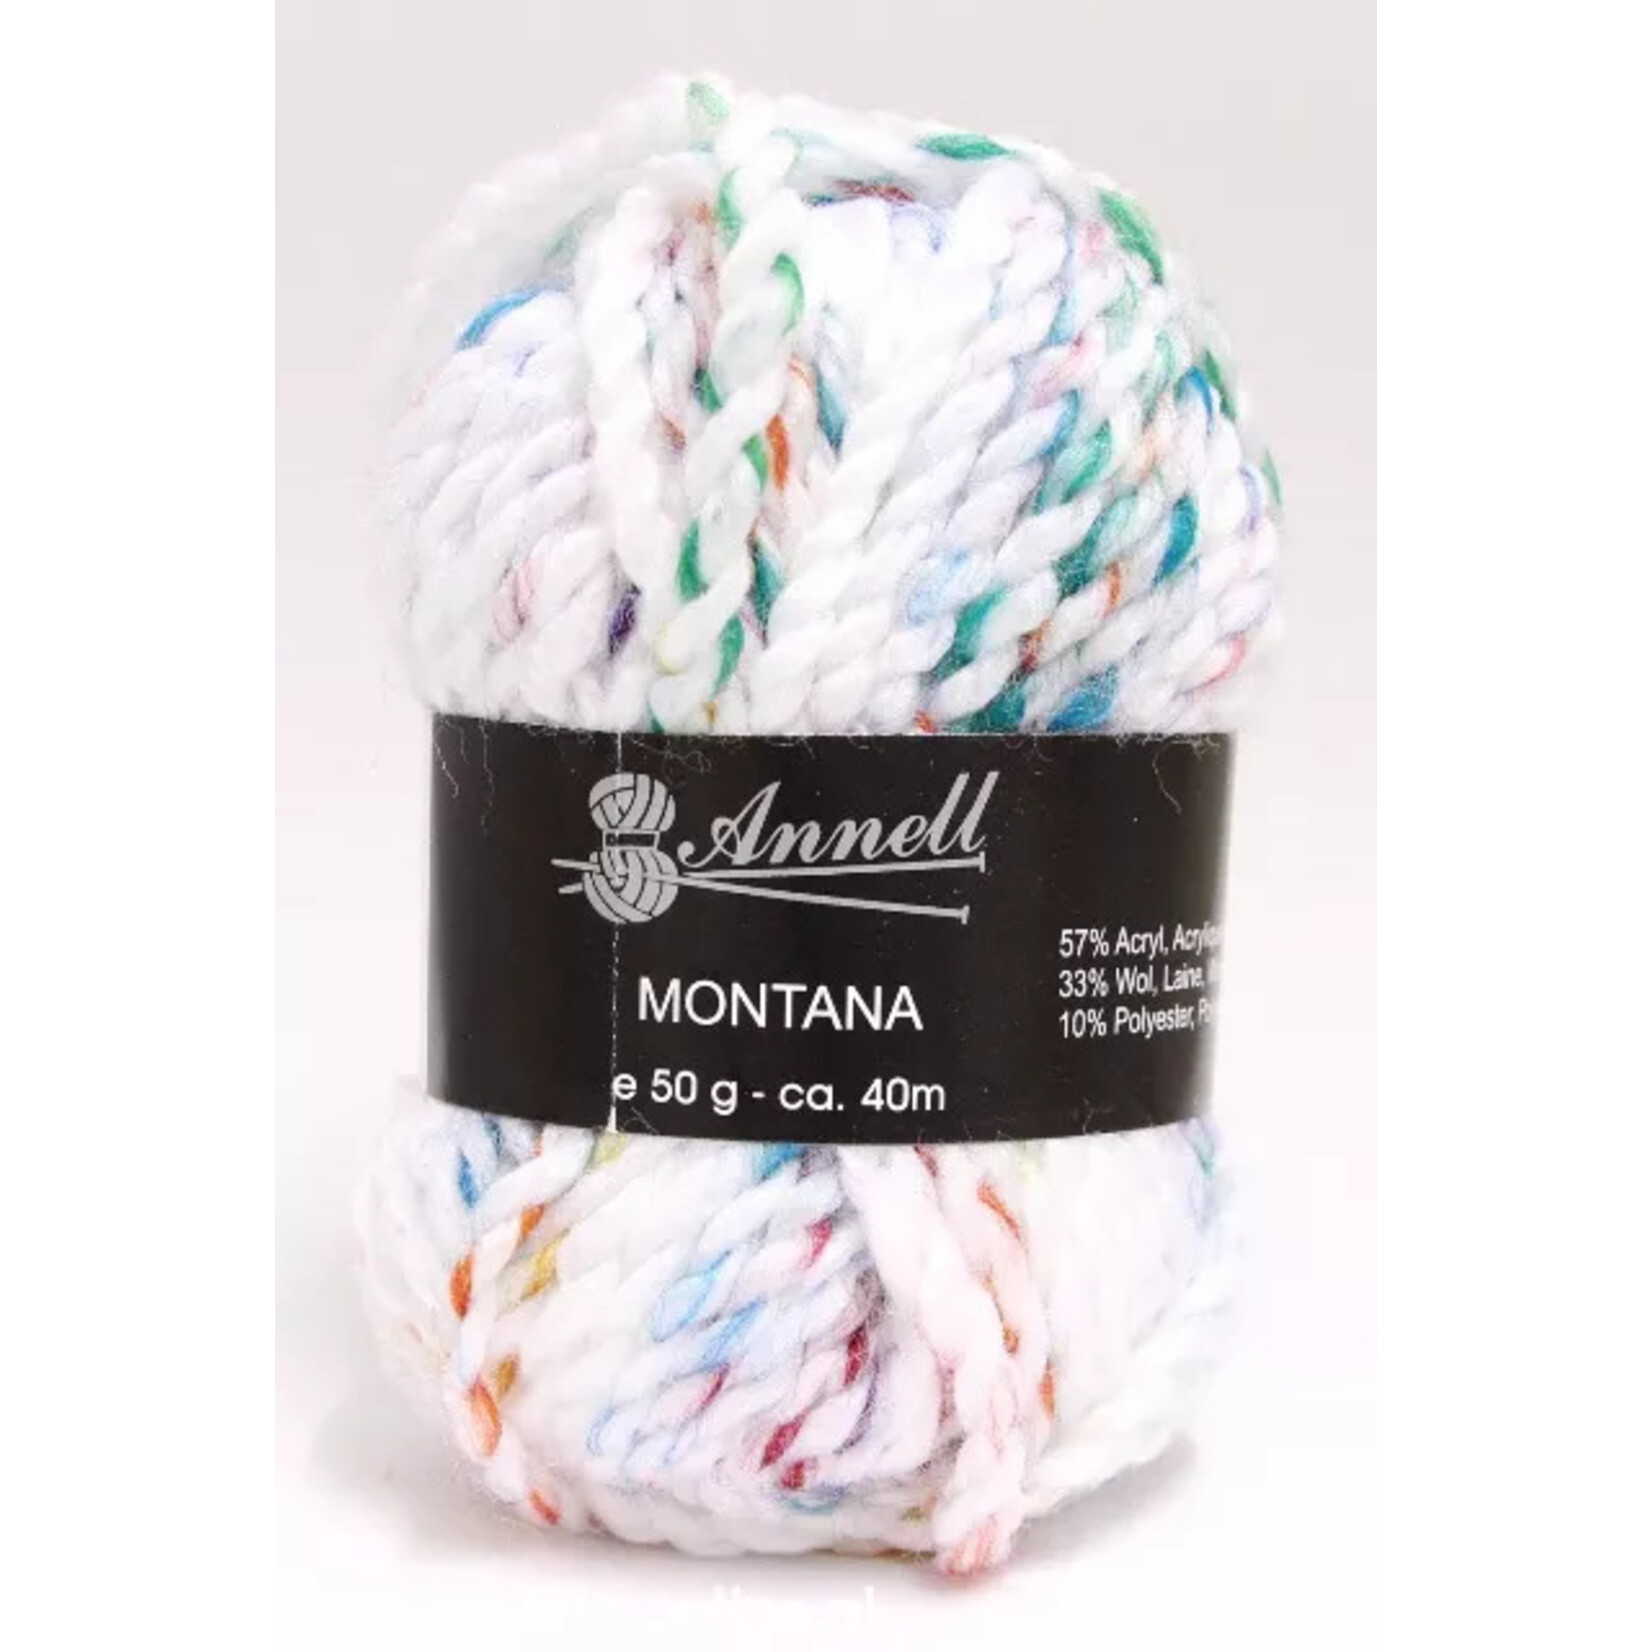 annell montana 5643